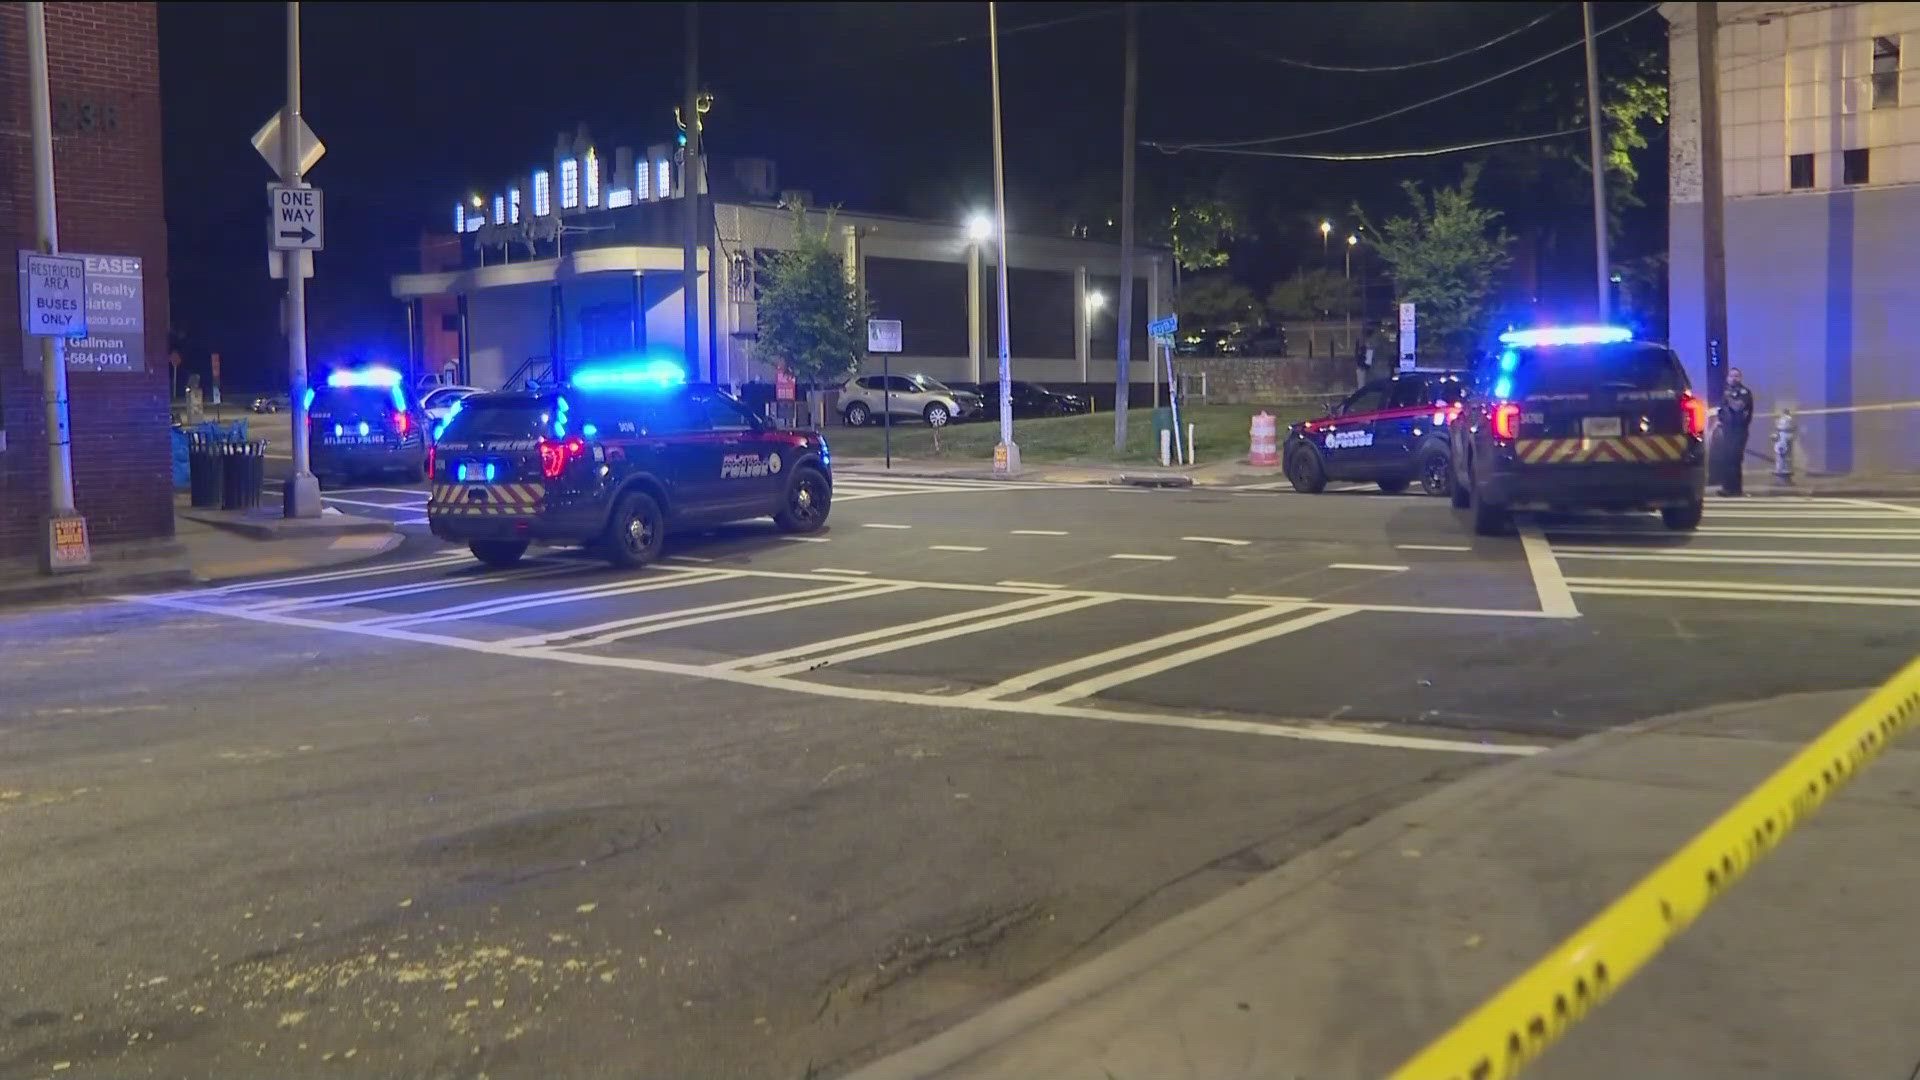 A man is dead following a shooting involving two groups near Magic City, according to the Atlanta Police Department.